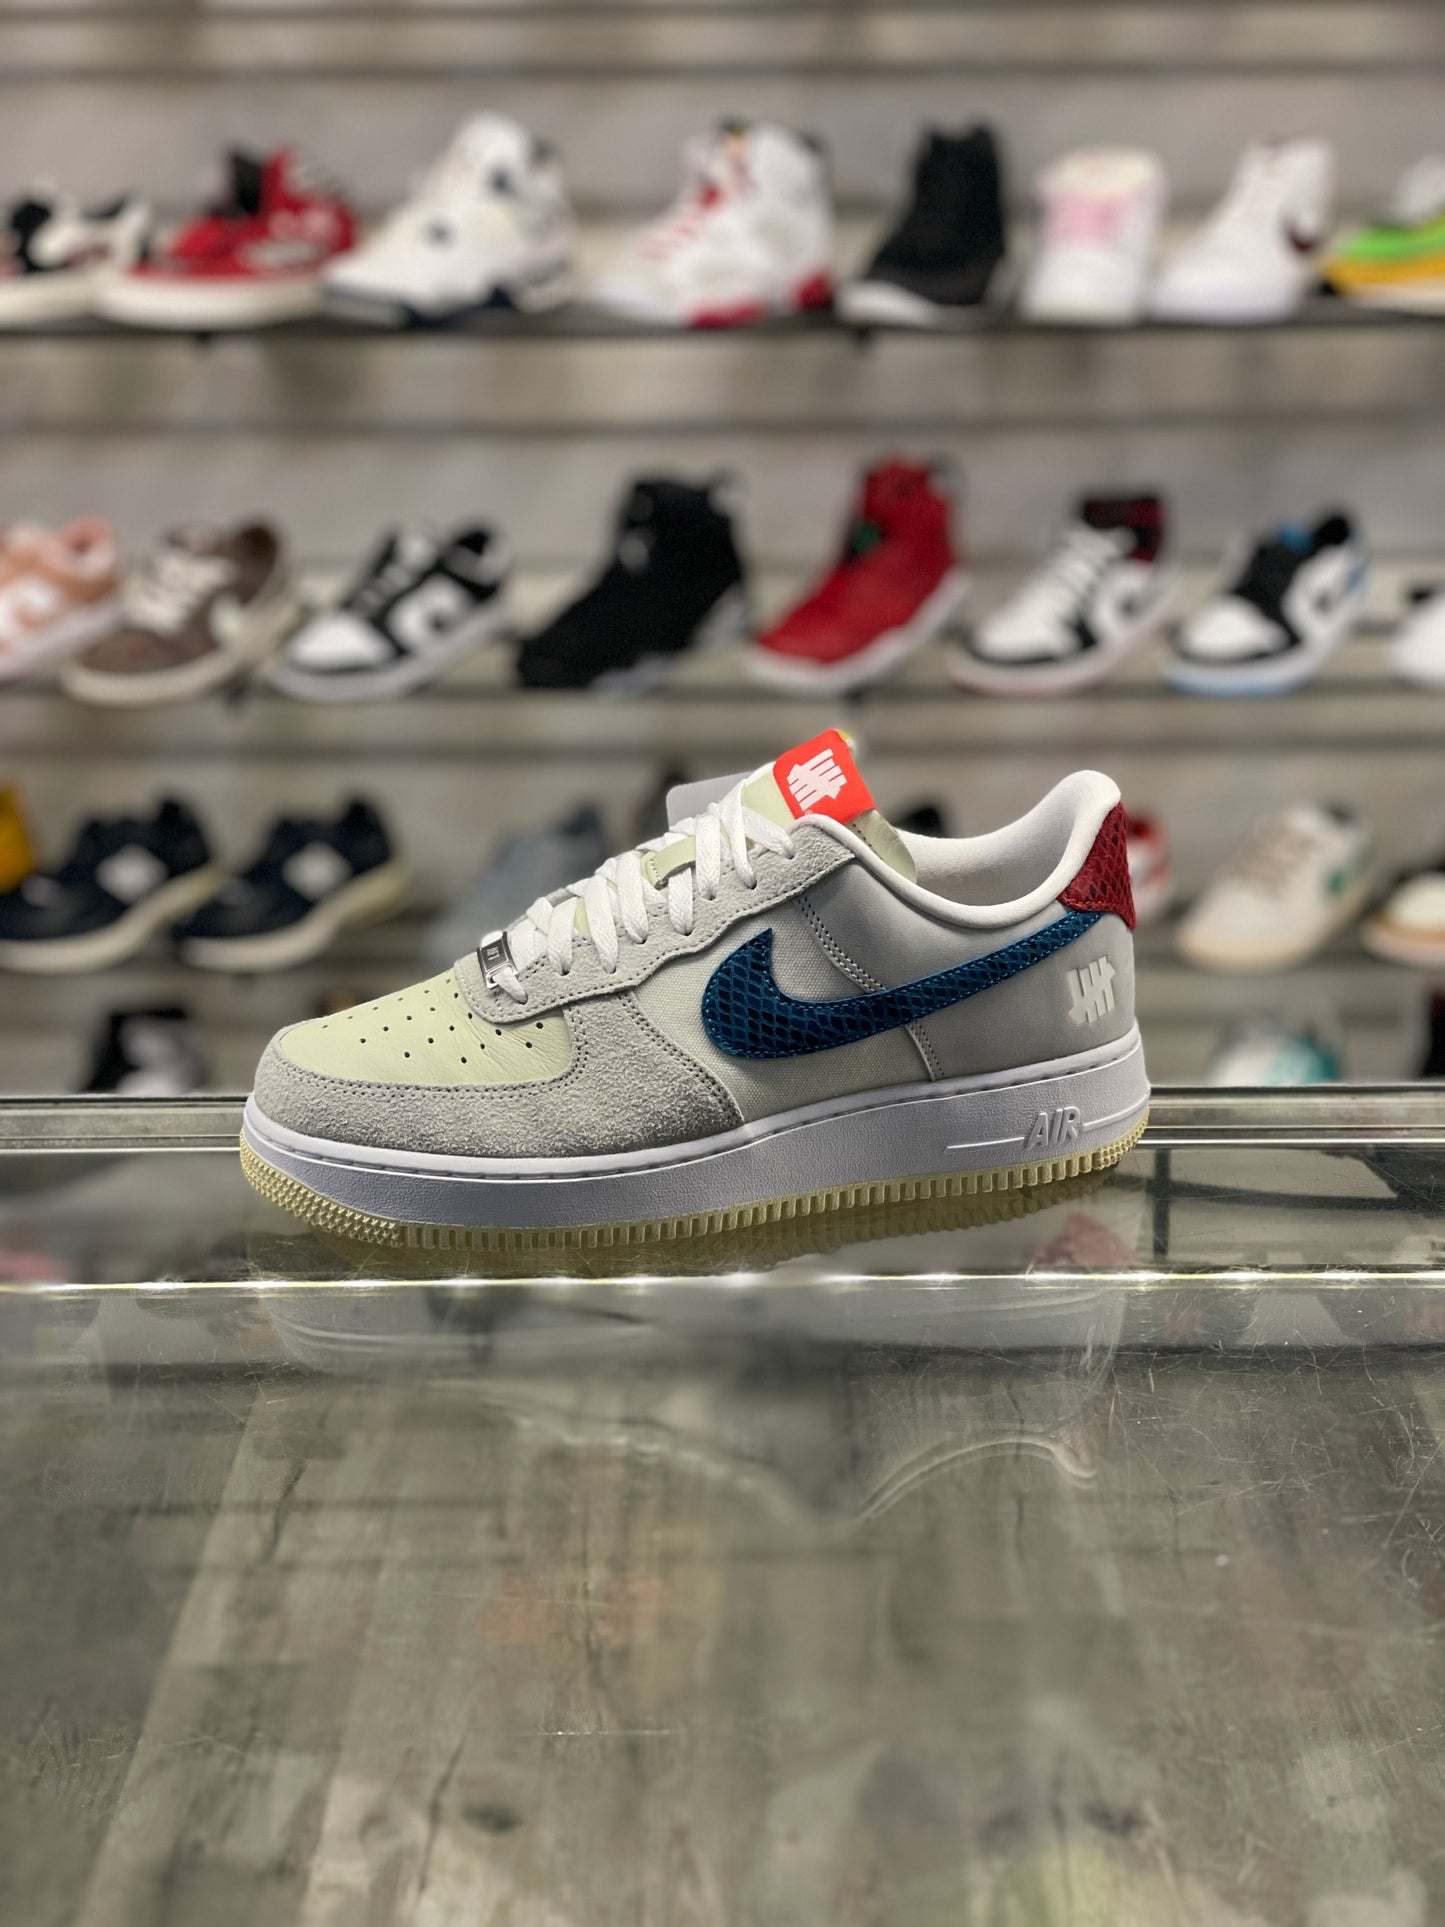 Nike Air Force One Low Undftd 5 Cream/Snake